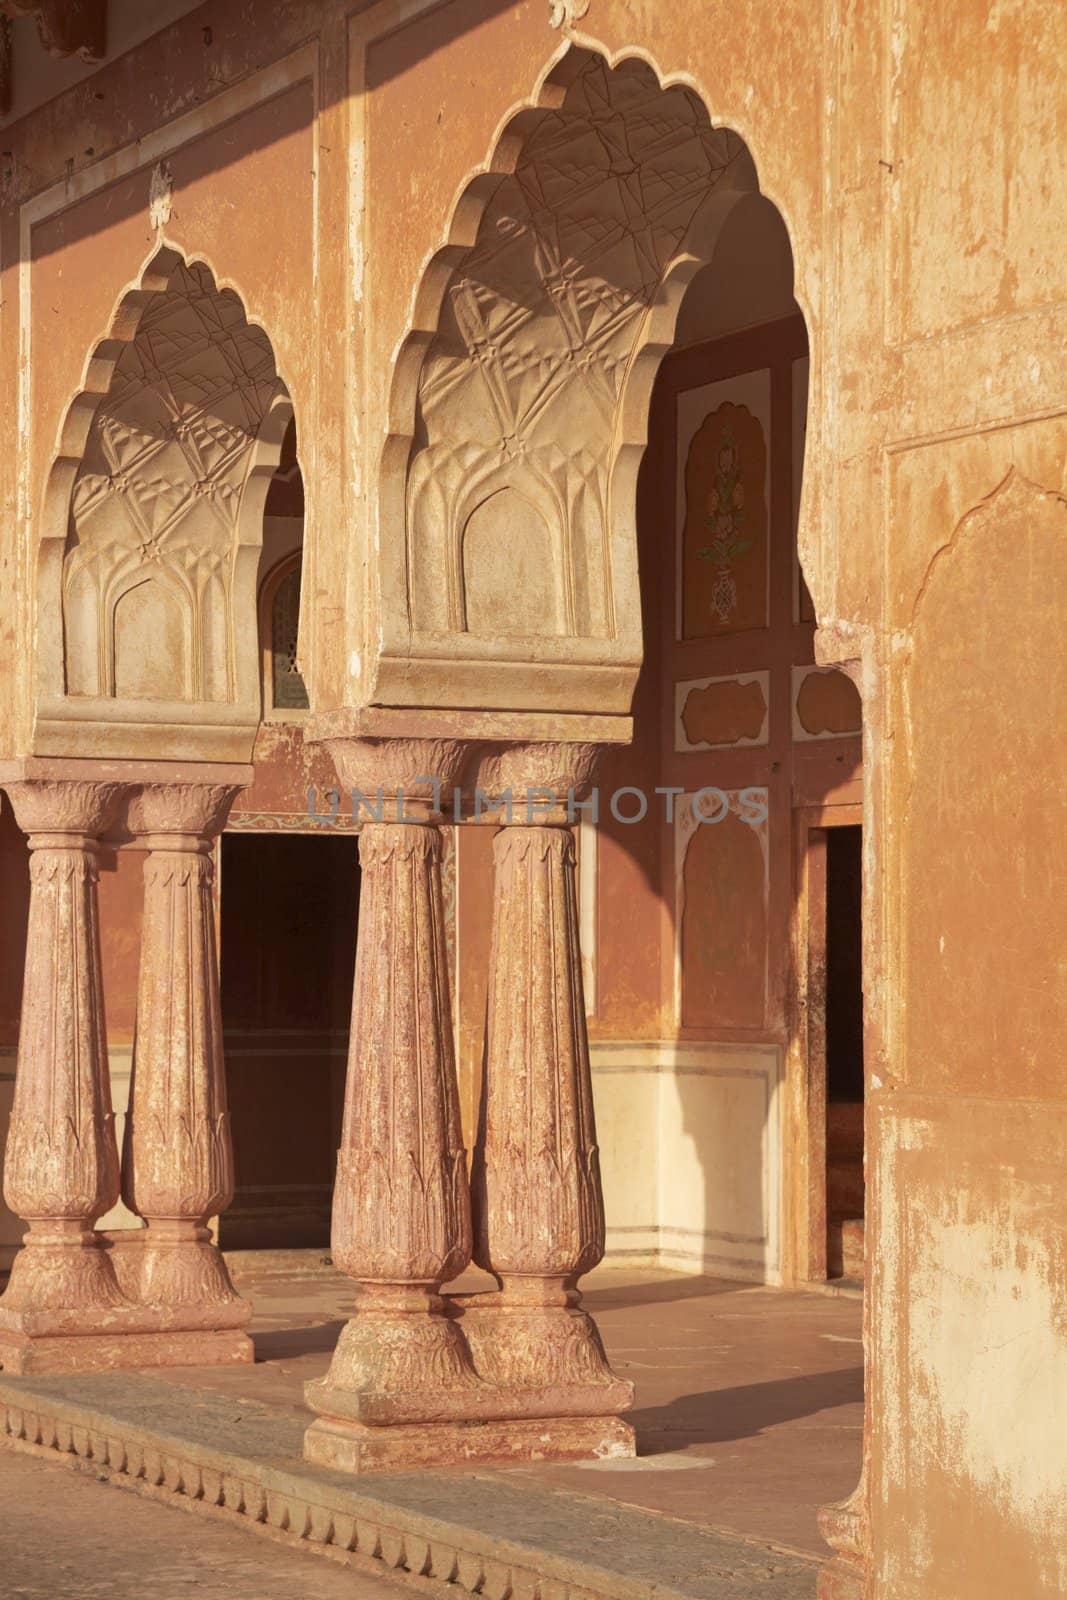 Arches of Indian Palace inside Jaigarh Fort, Jaipur, Rajasthan, India.